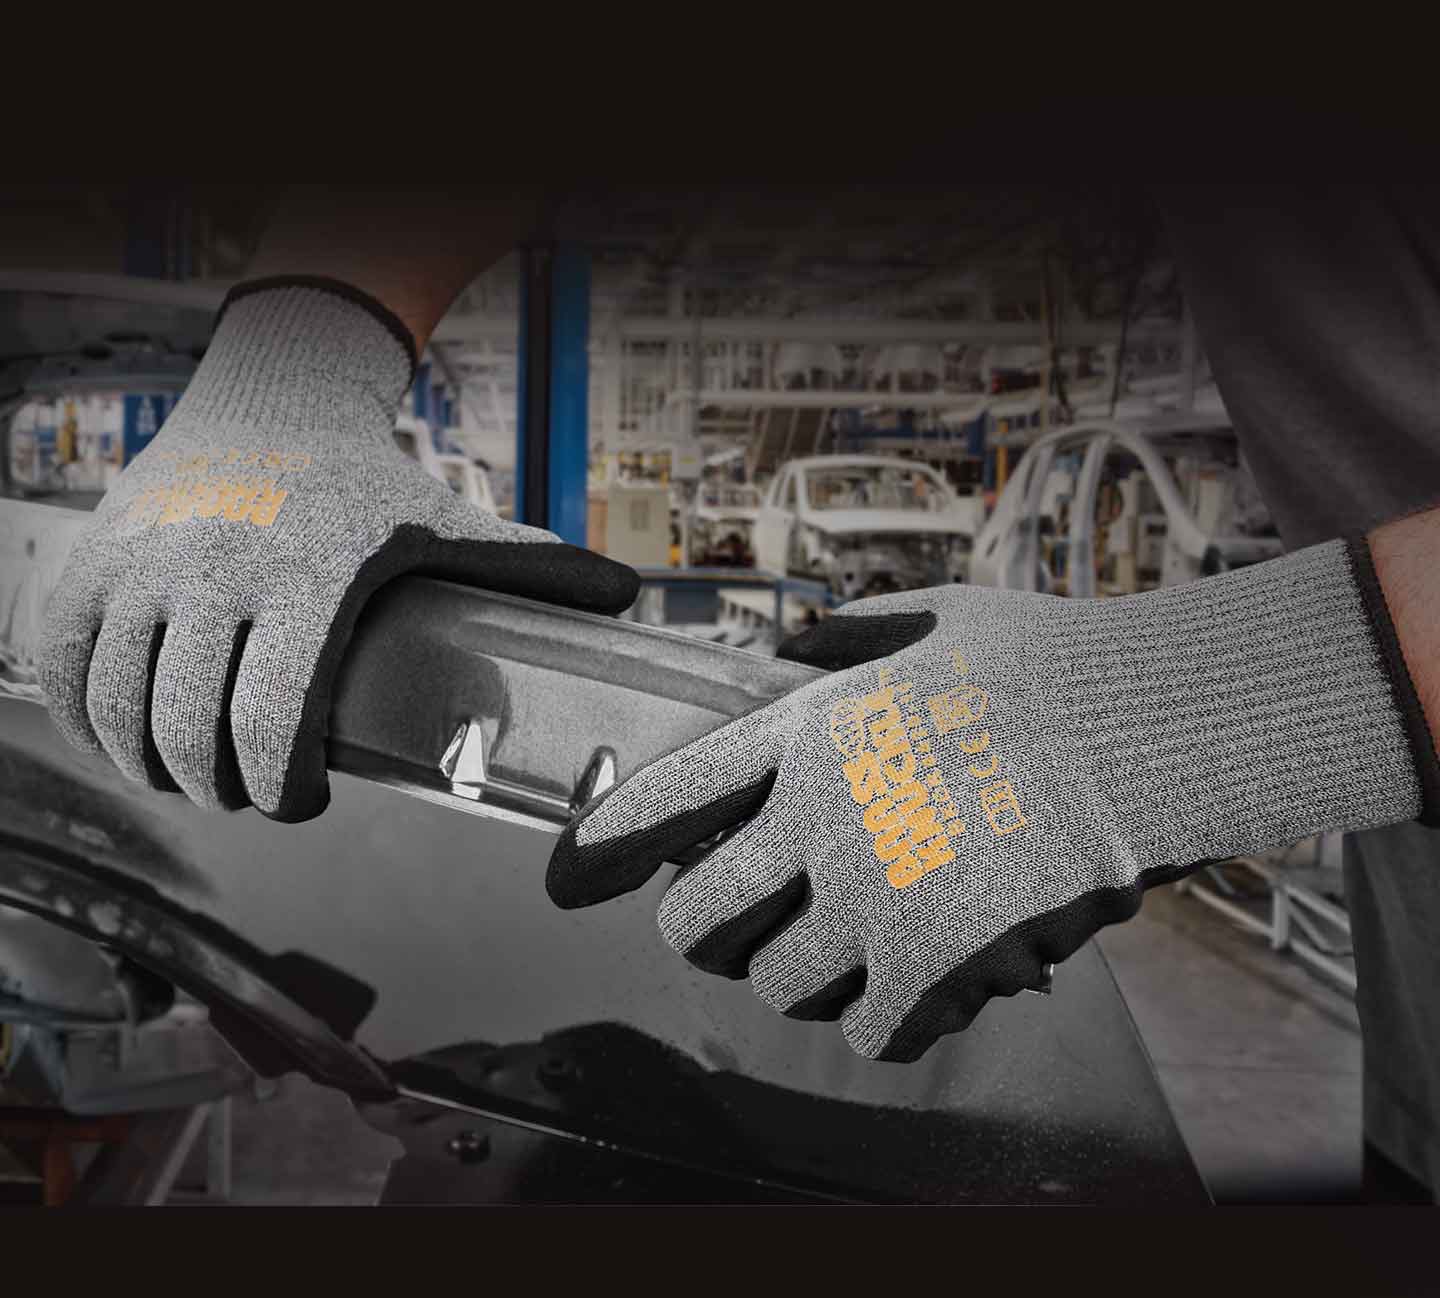 Brass Knuckle Protection Safety Eyewear and Cut Resistant Gloves